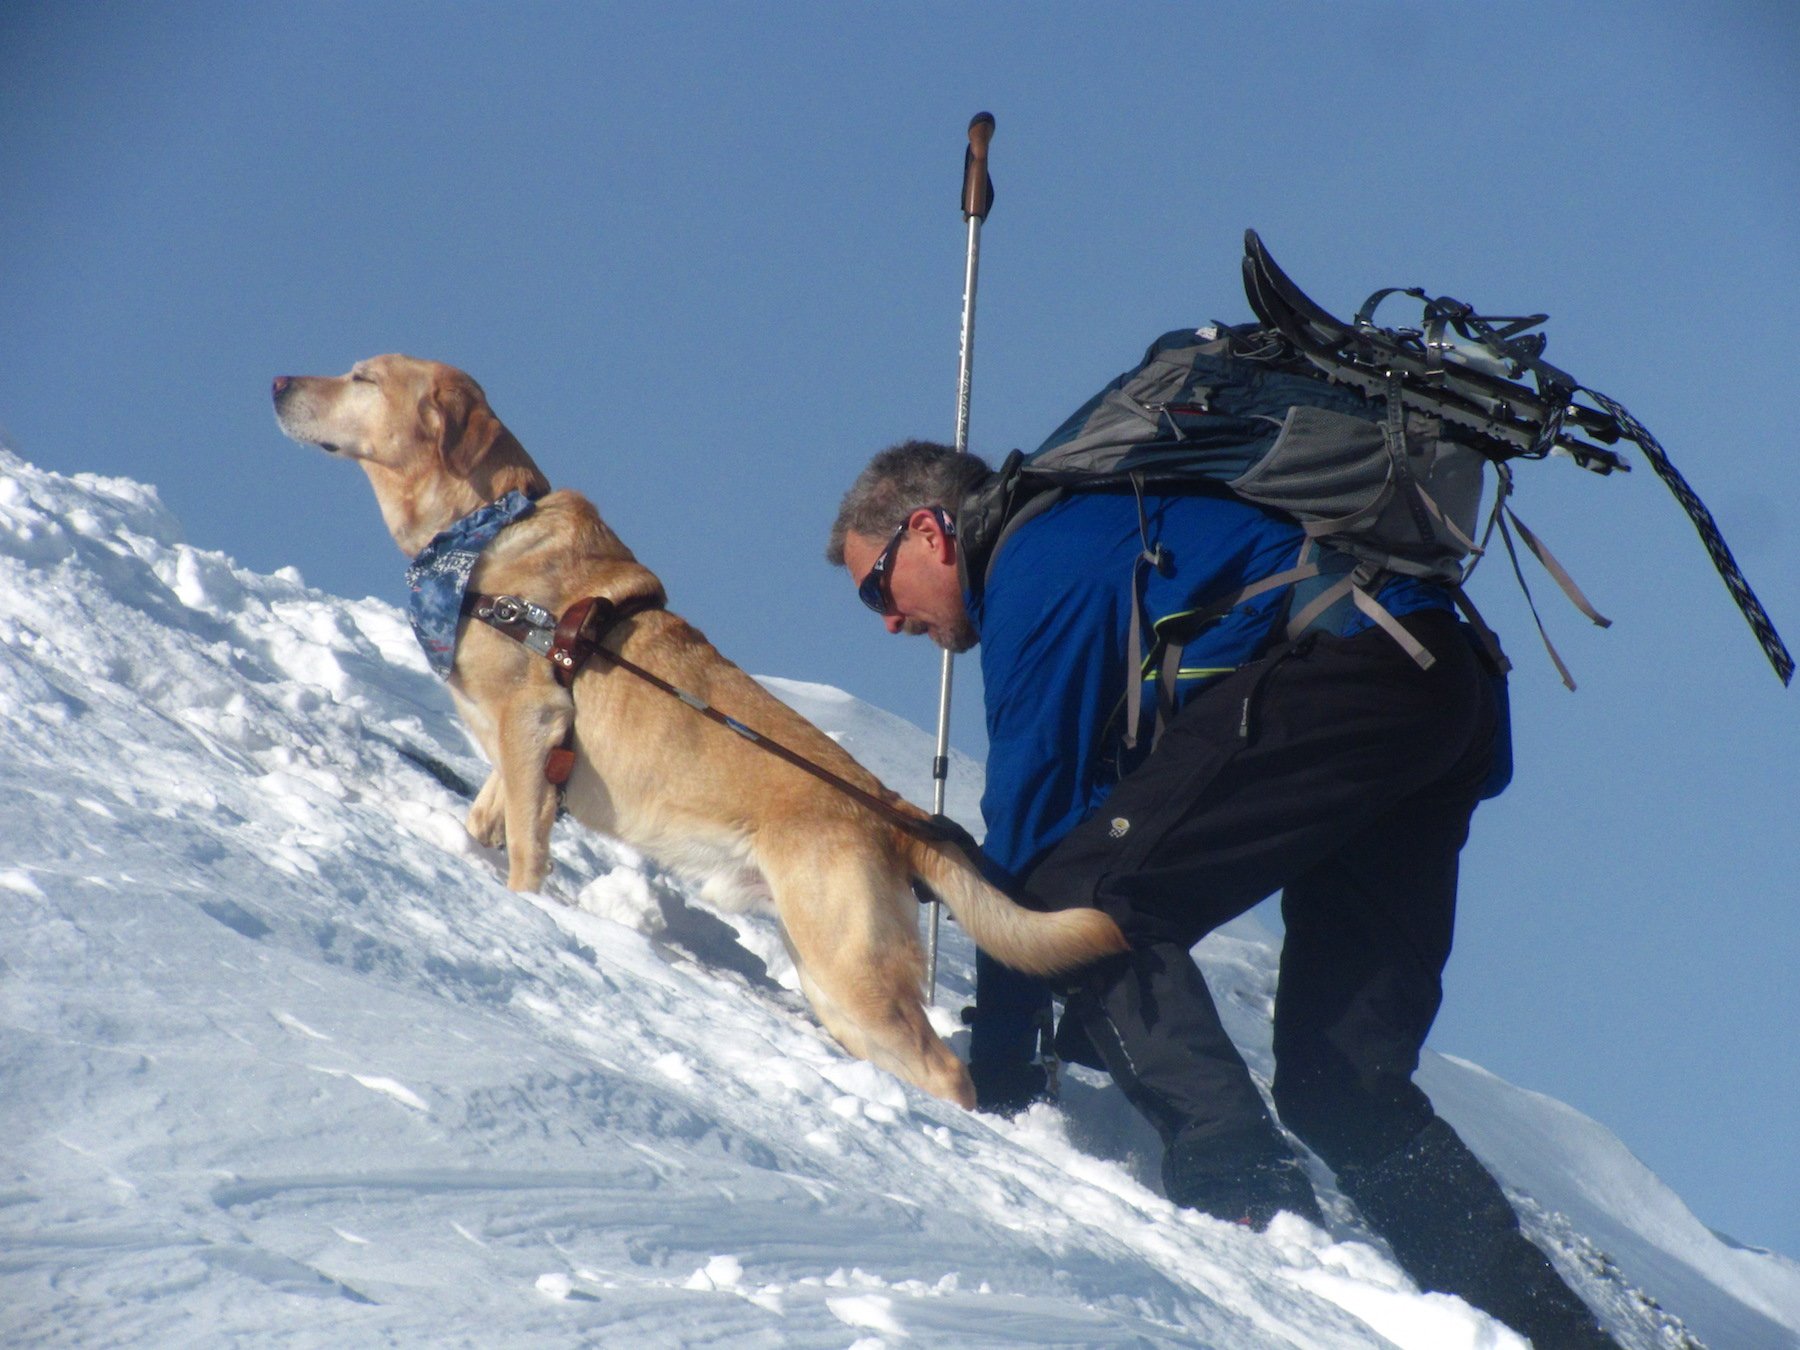 Randy Pierce climbing a snow covered mountain with his guide dog